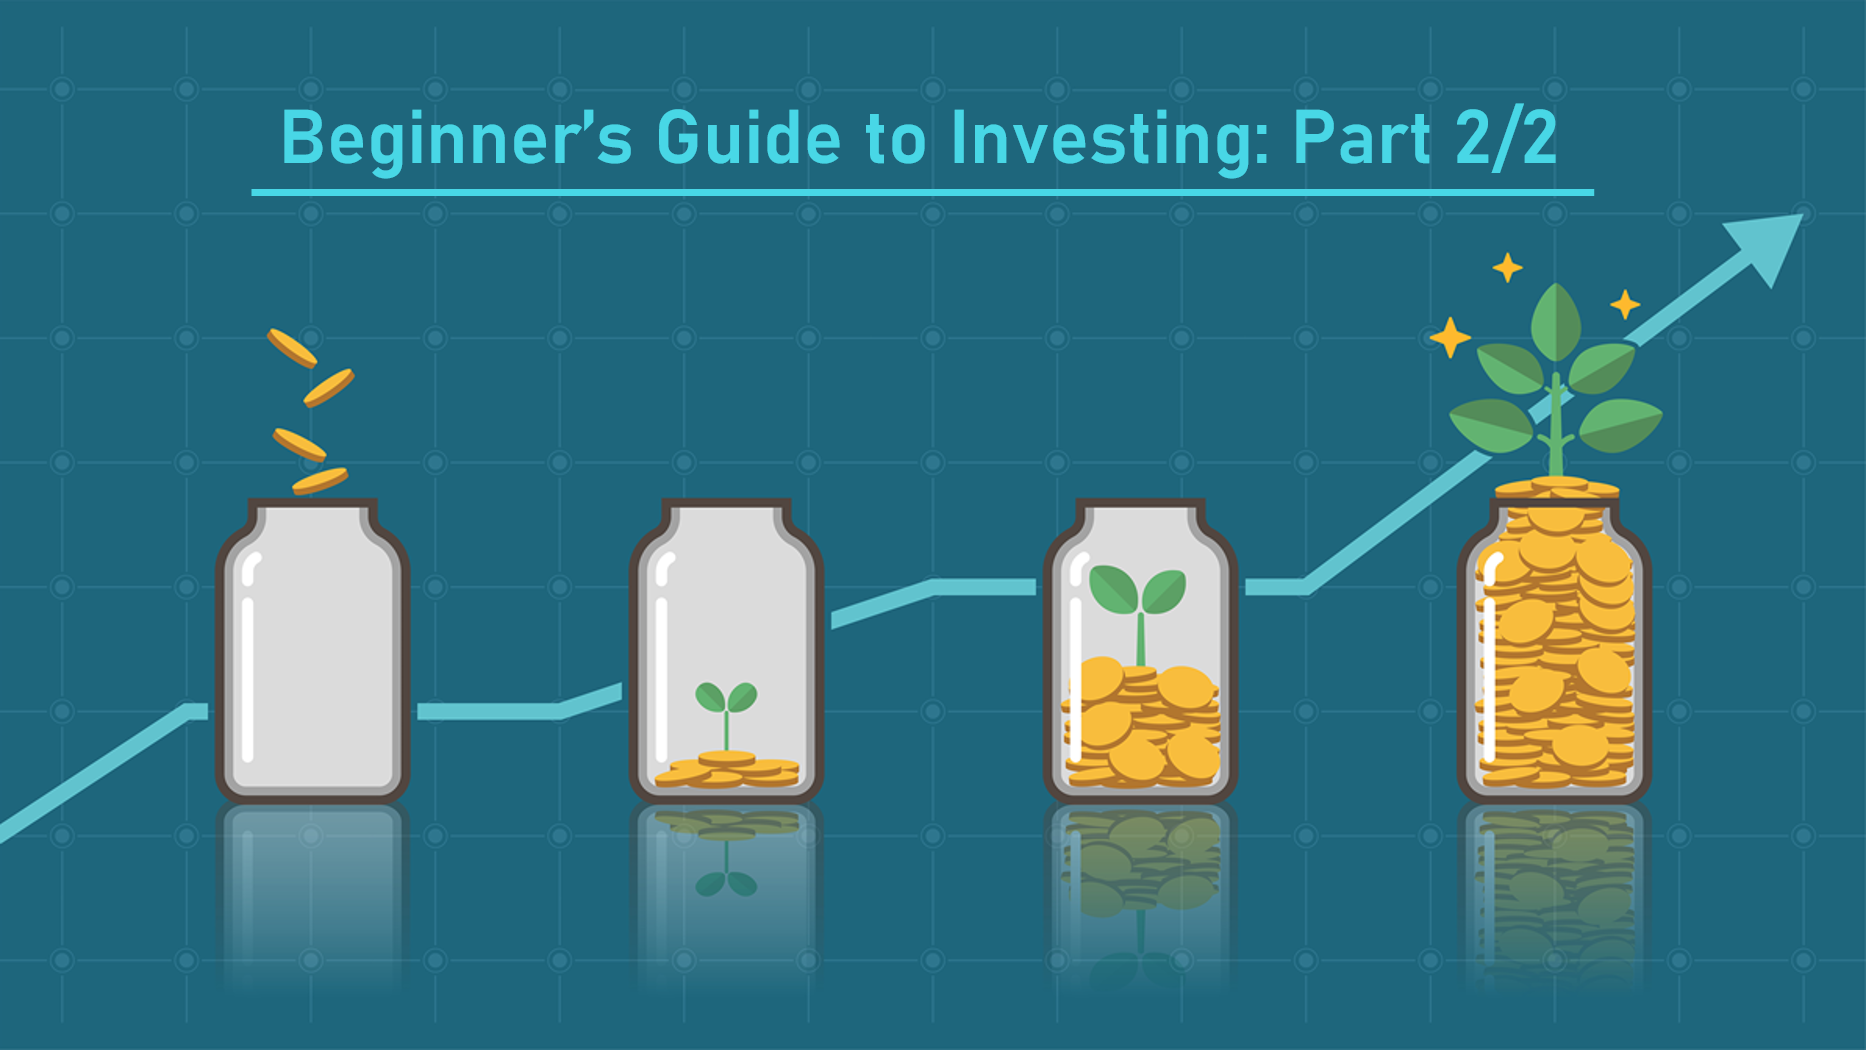 Beginner’s Guide to Investing: Part 2/2